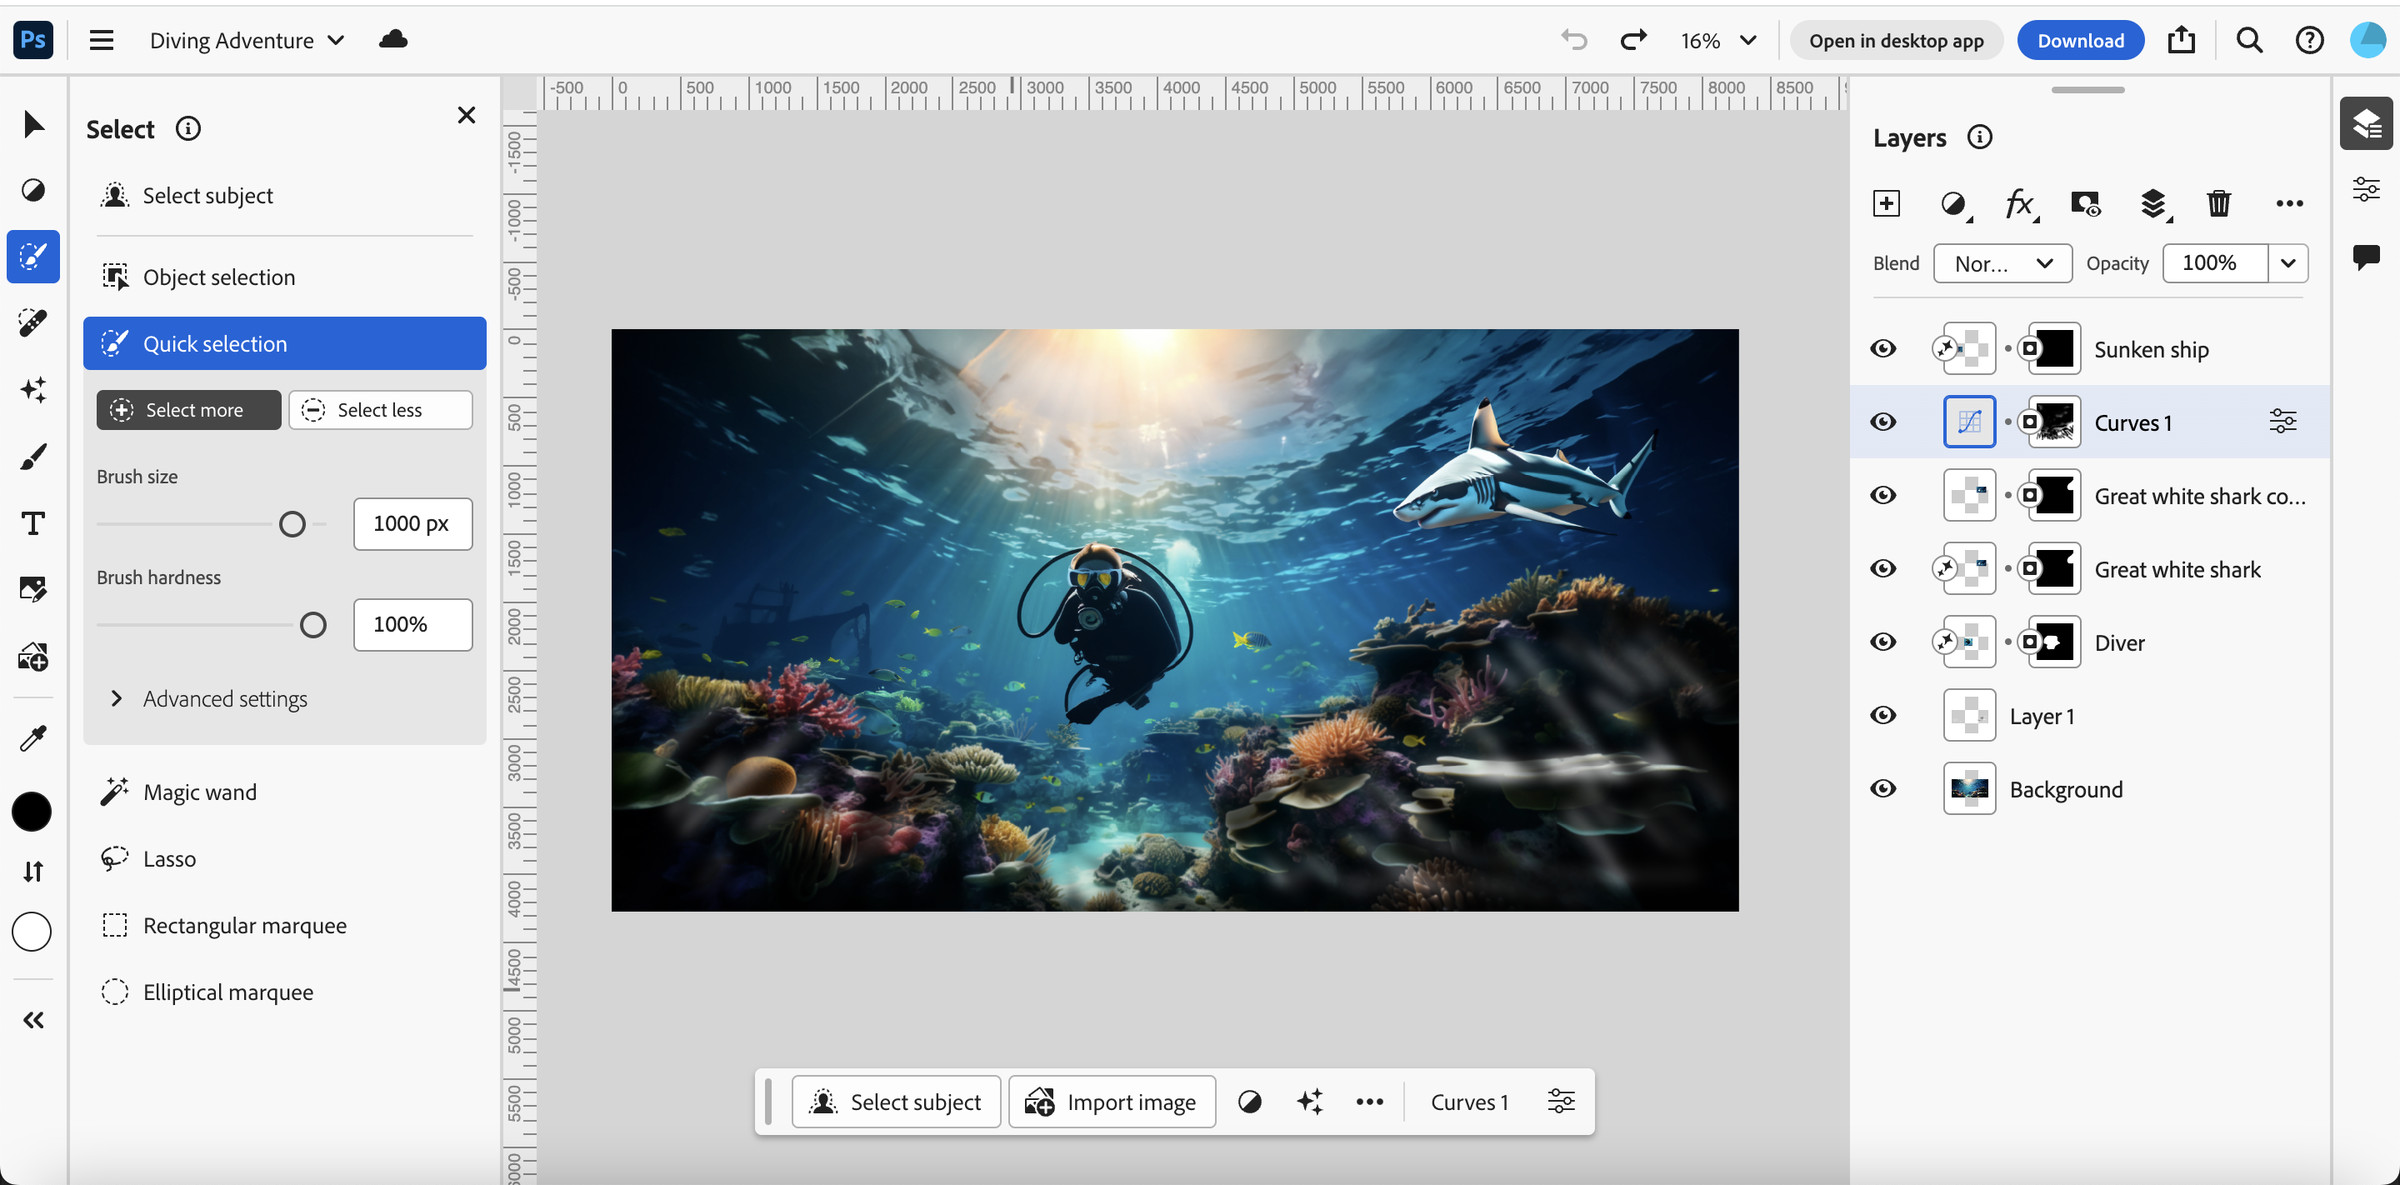 A screenshot of Adobe’s Photoshop for the web experience, featuring a picture of a scuba diver.